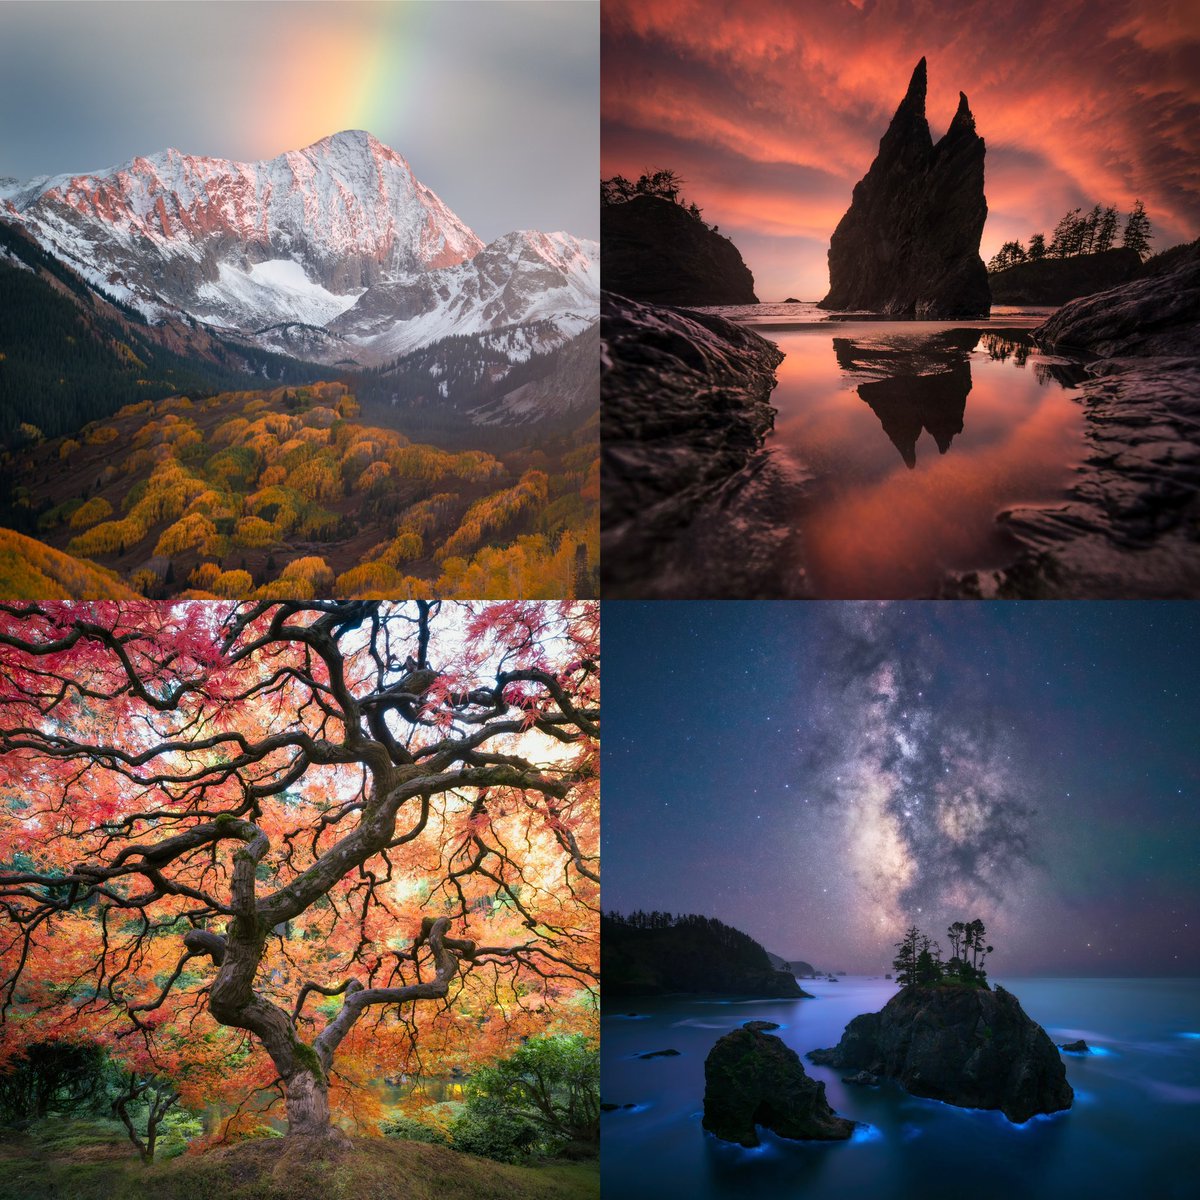 Appreciate all the support, likes and RTs over the past few days! Last few hours of my Print Store! Don’t miss out on these and more. I’ll never sell these again as prints online ever again once we close up shop! 📷

👇🏼👇🏼👇🏼👇🏼👇🏼👇🏼

krlphotoworkshops.com